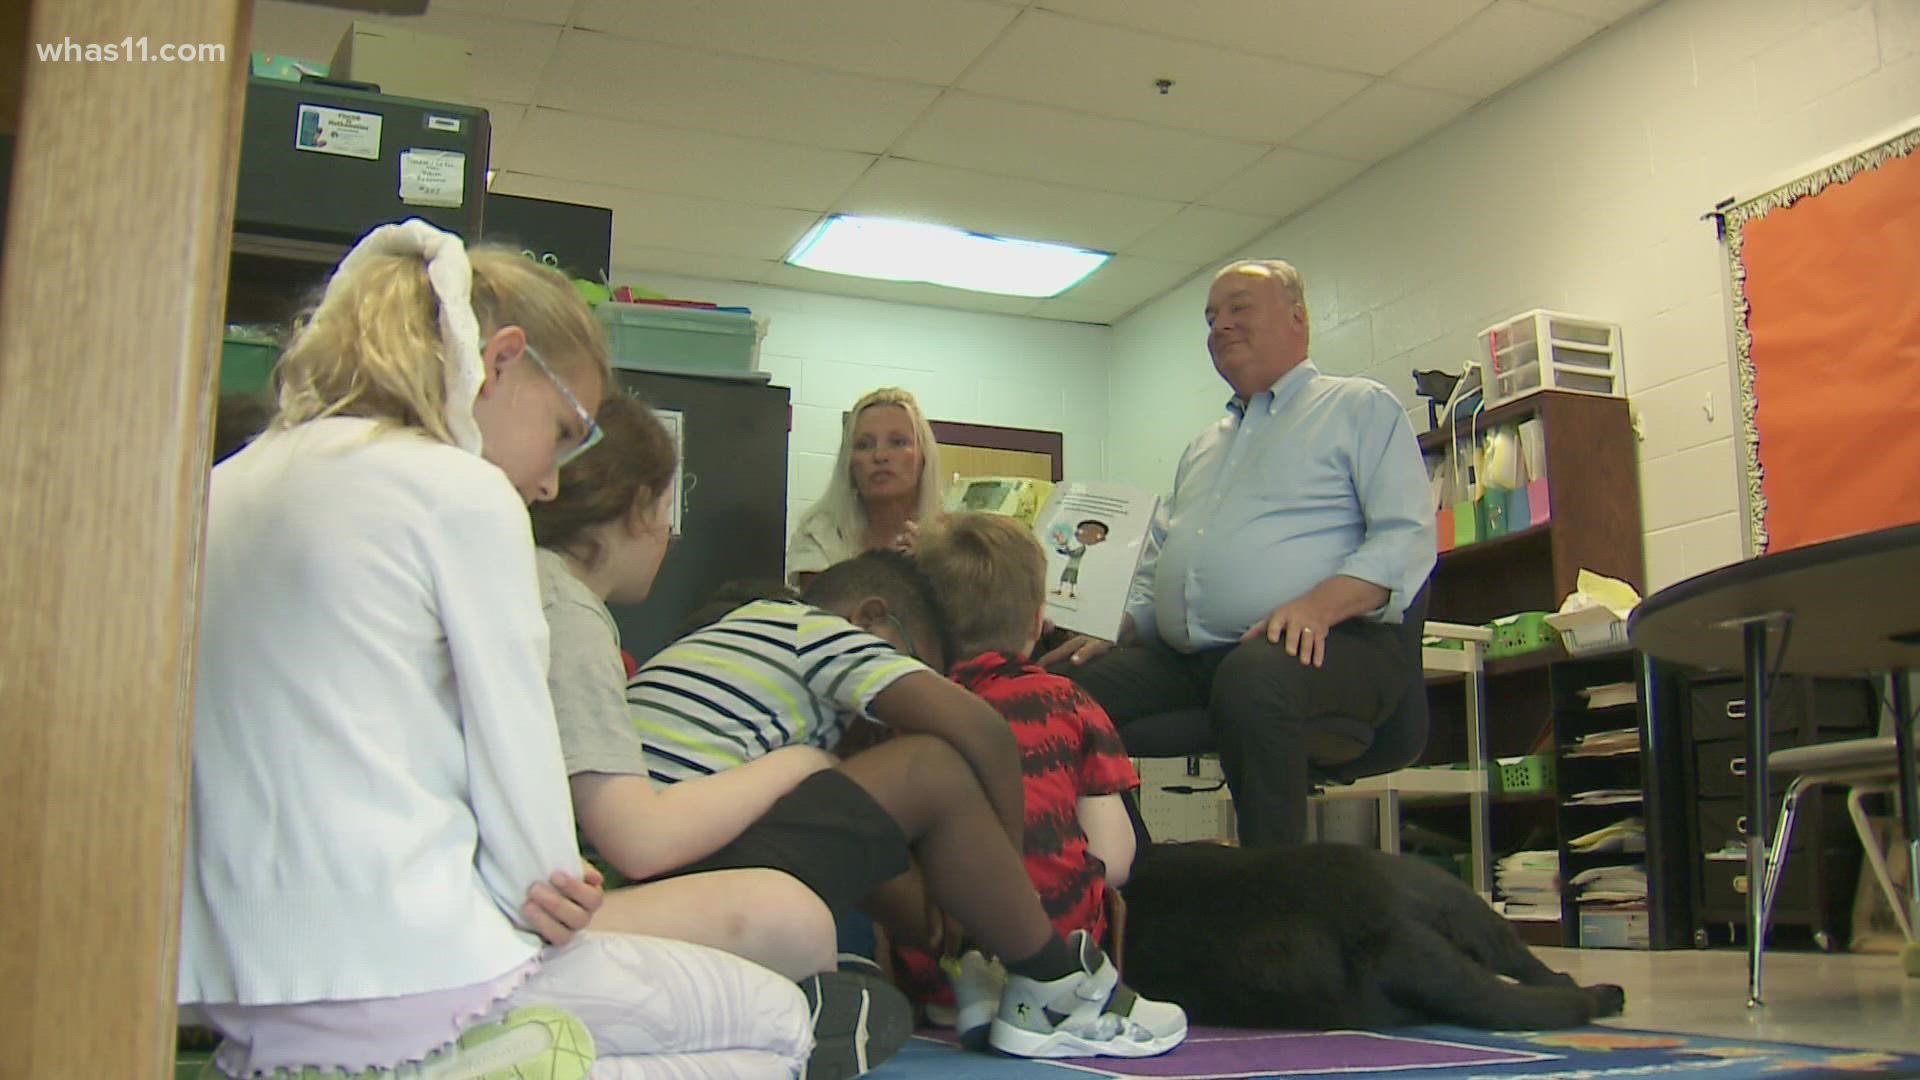 Breckinridge Franklin is the only JCPS elementary school with a program for blind students.